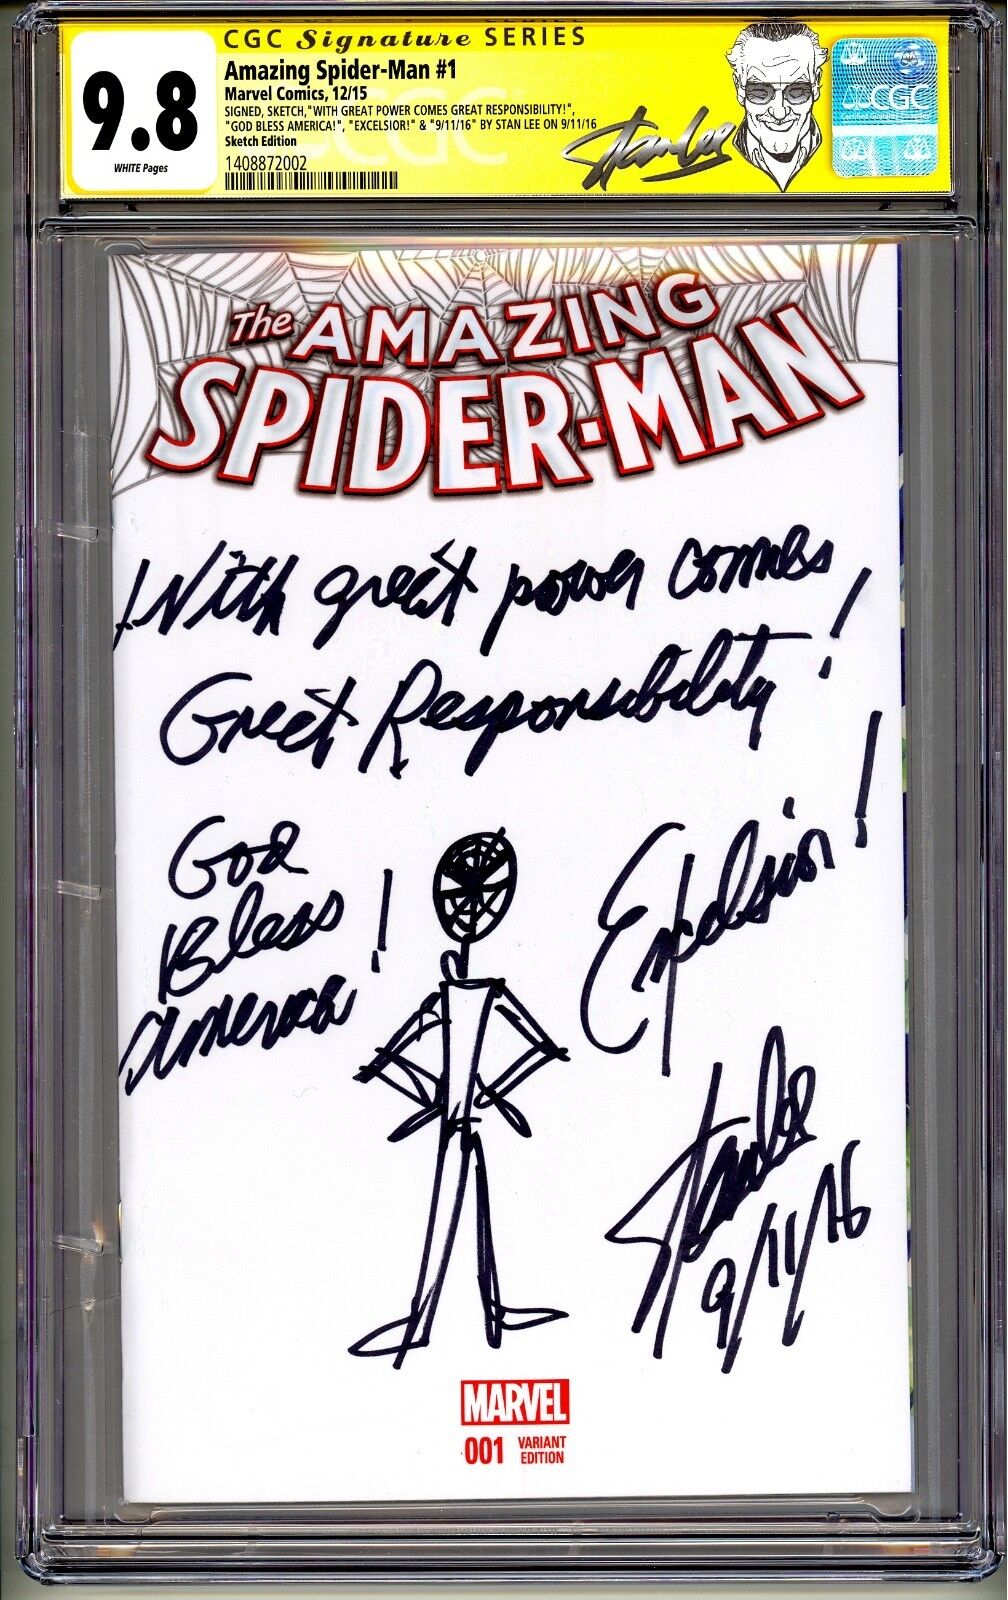 💥AMAZING SPIDER-MAN #1 CGC SS 9.8 STAN LEE SIGNED SKETCH DATE QUOTE COMMENT 1/1